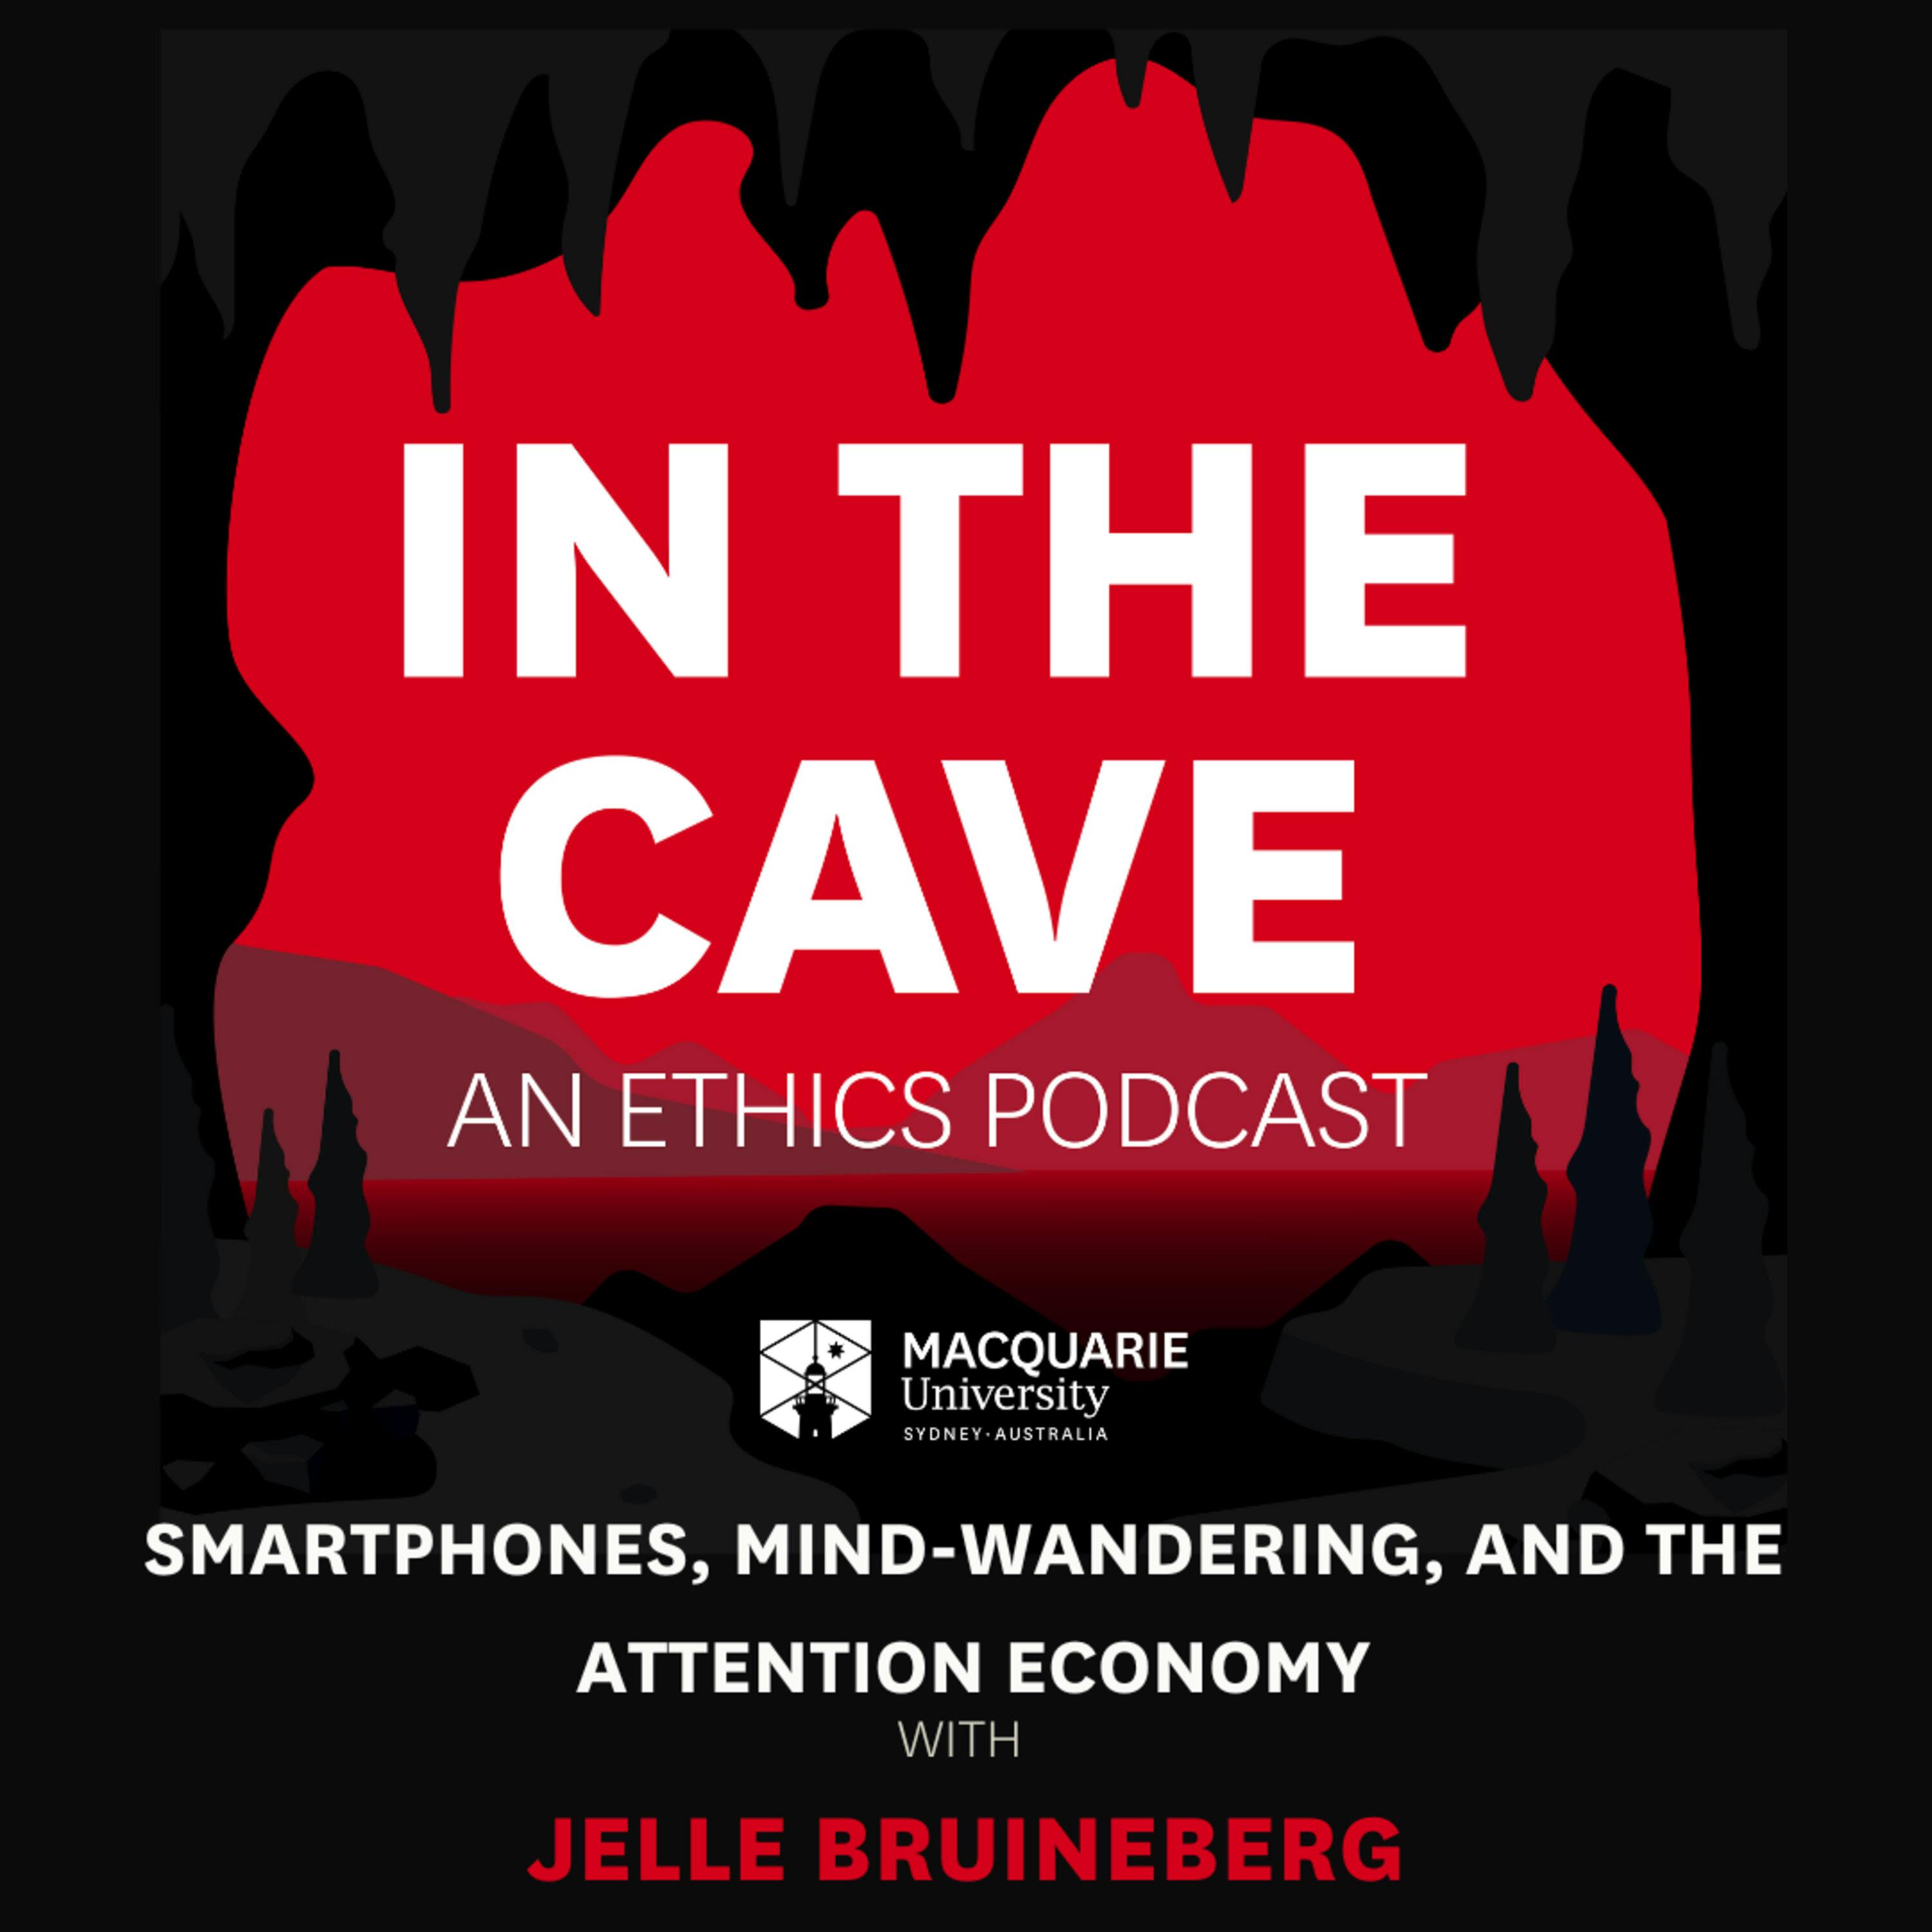 Smartphones, mind-wandering, and the attention economy with Jelle Bruineberg